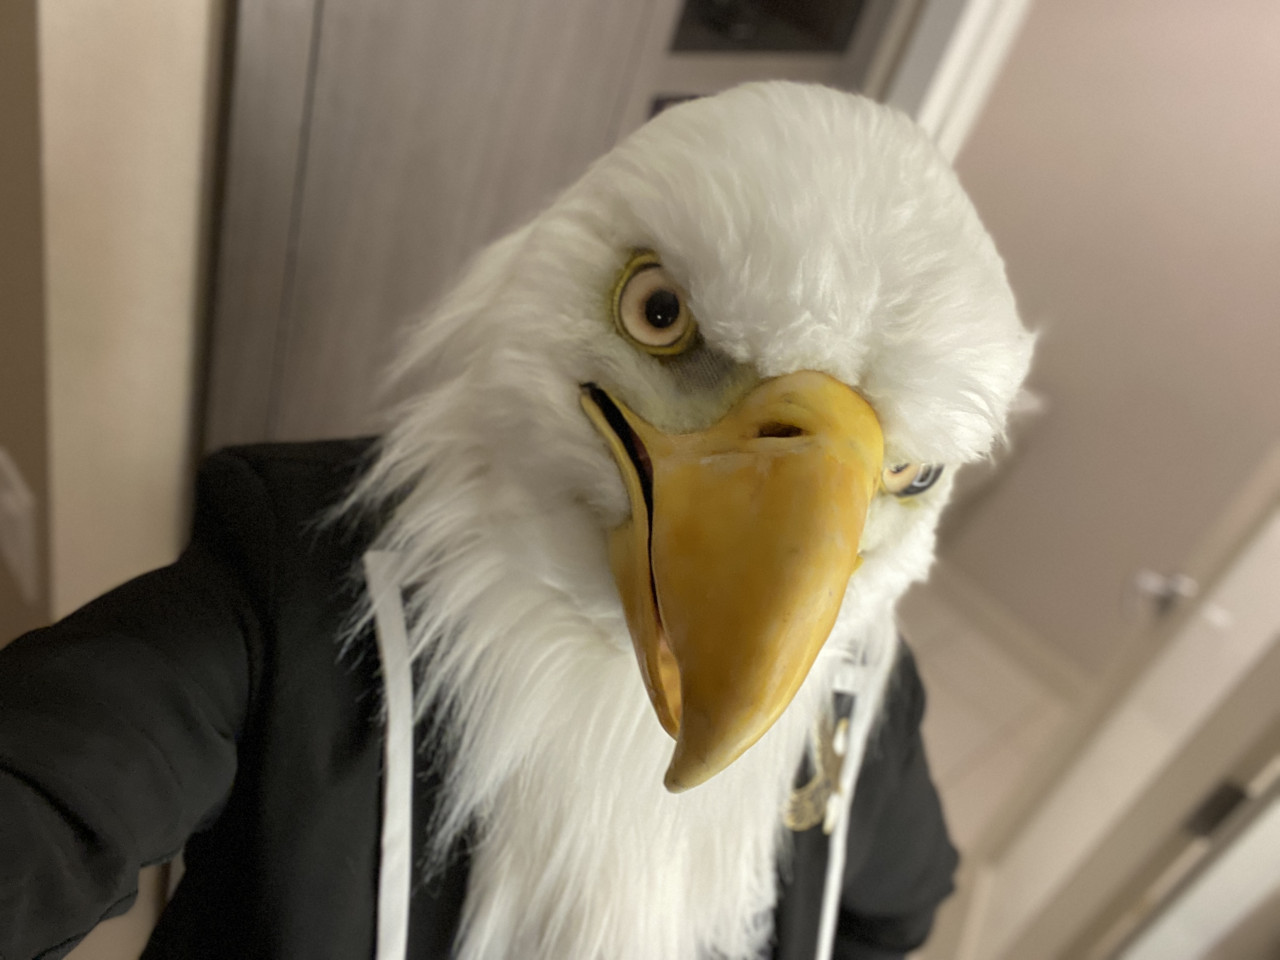 Me dressed in a white-trimmed sport jacket wearing my realistic eagle fursuit head